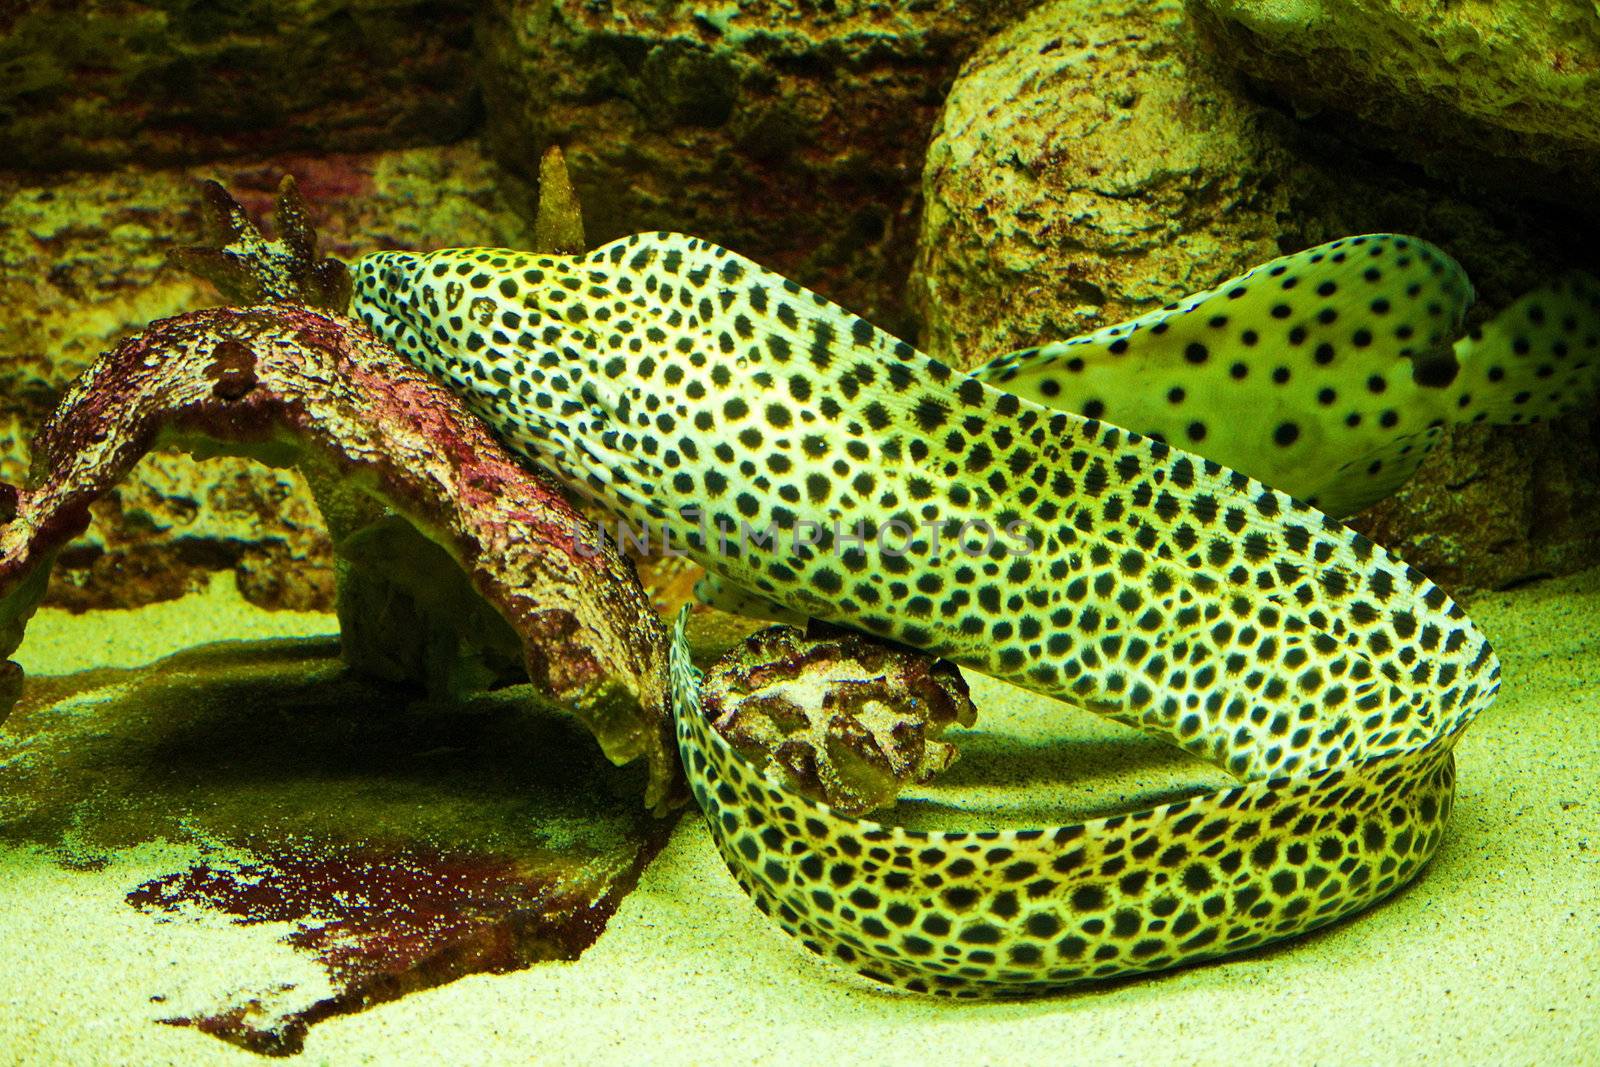 close-up moray fish swimming in water